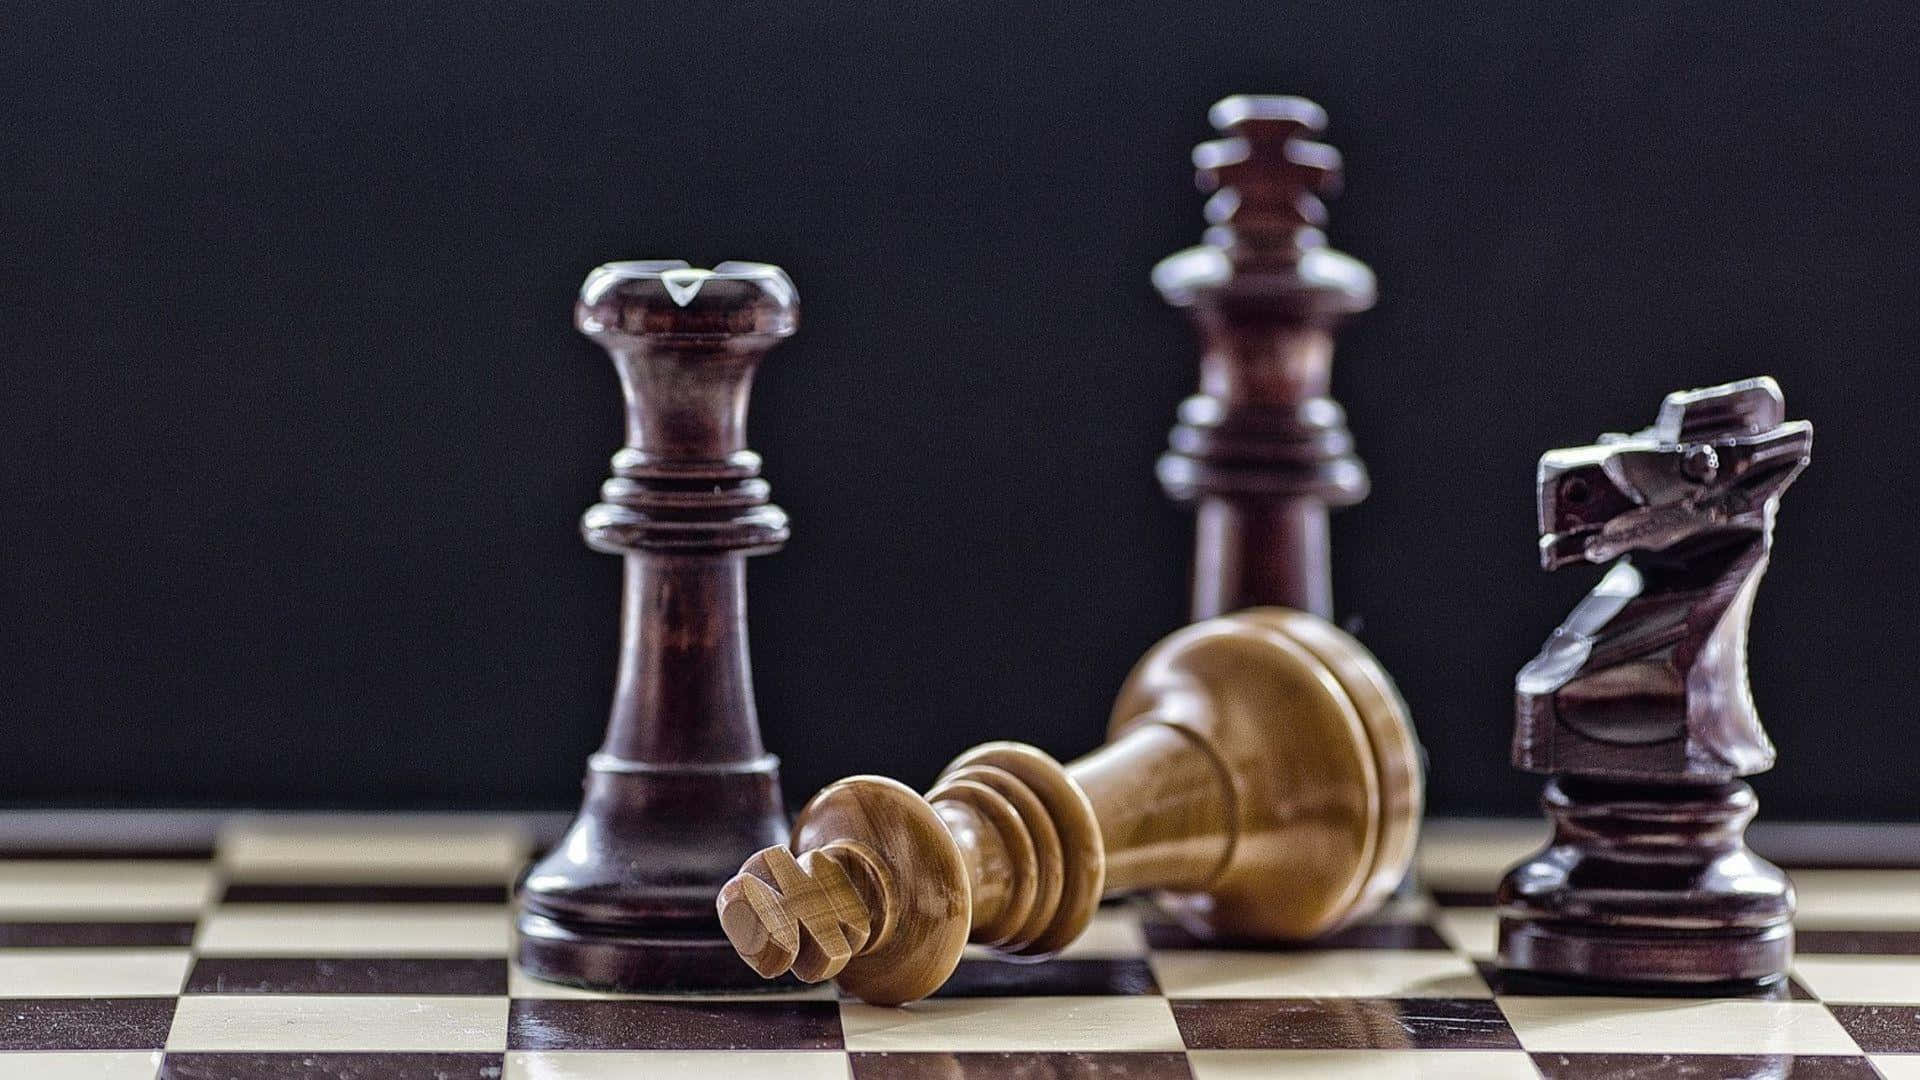 'The Battle is On: Play a Smart Game of Chess'